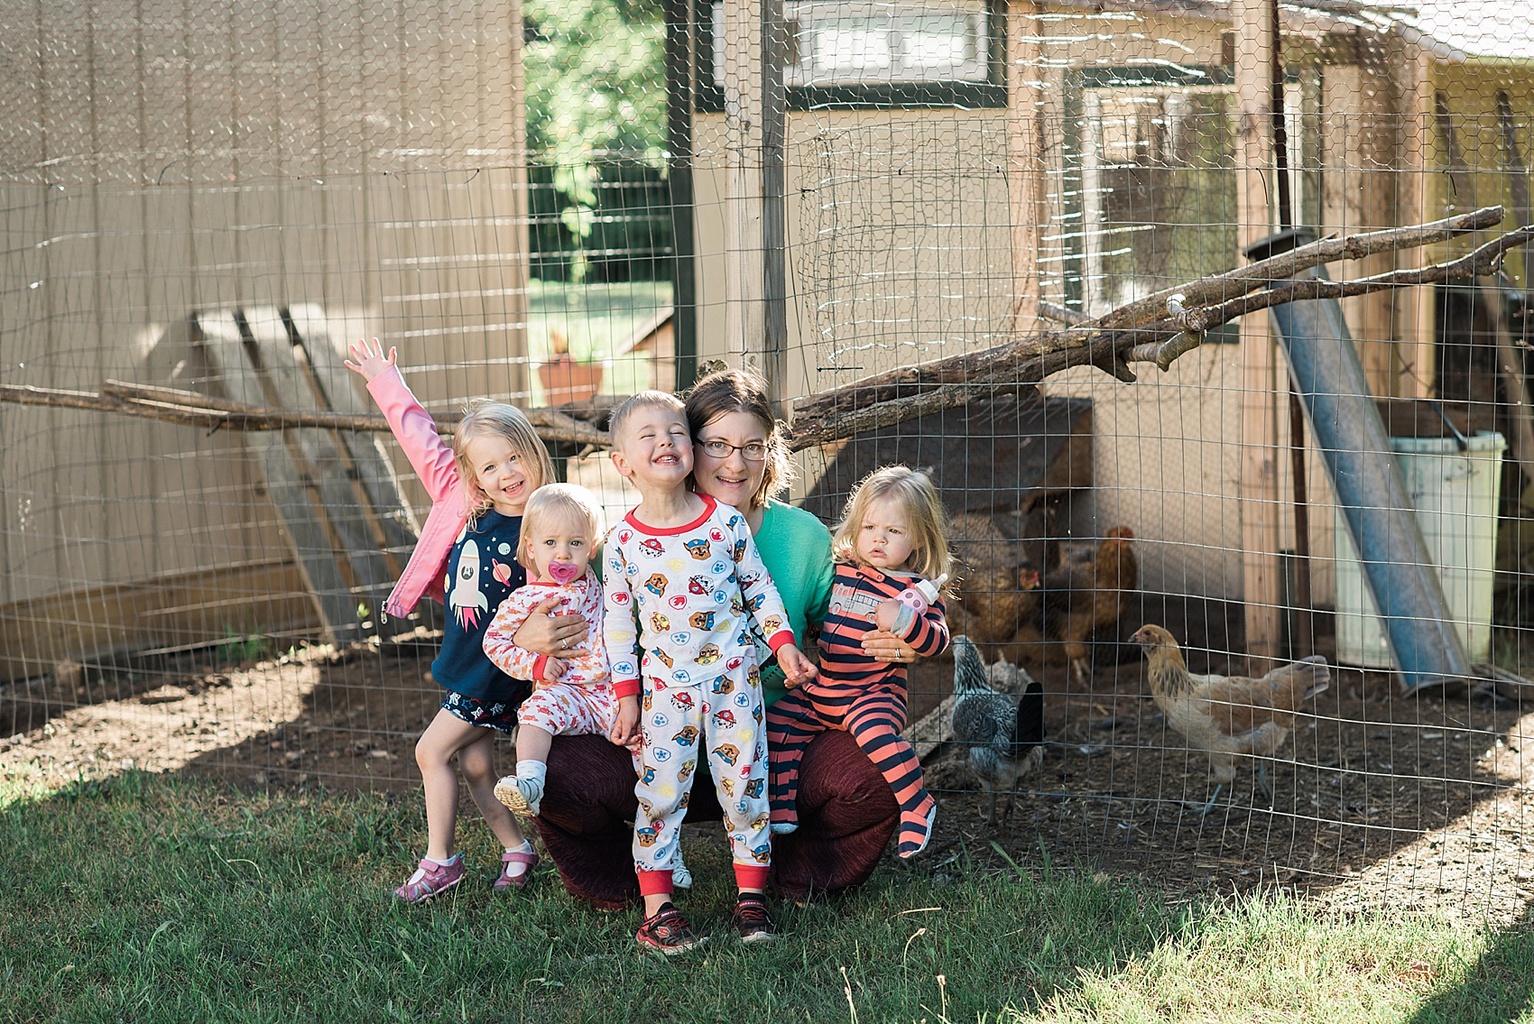 group photo near a chicken coop in the Saugatuck, Michigan area